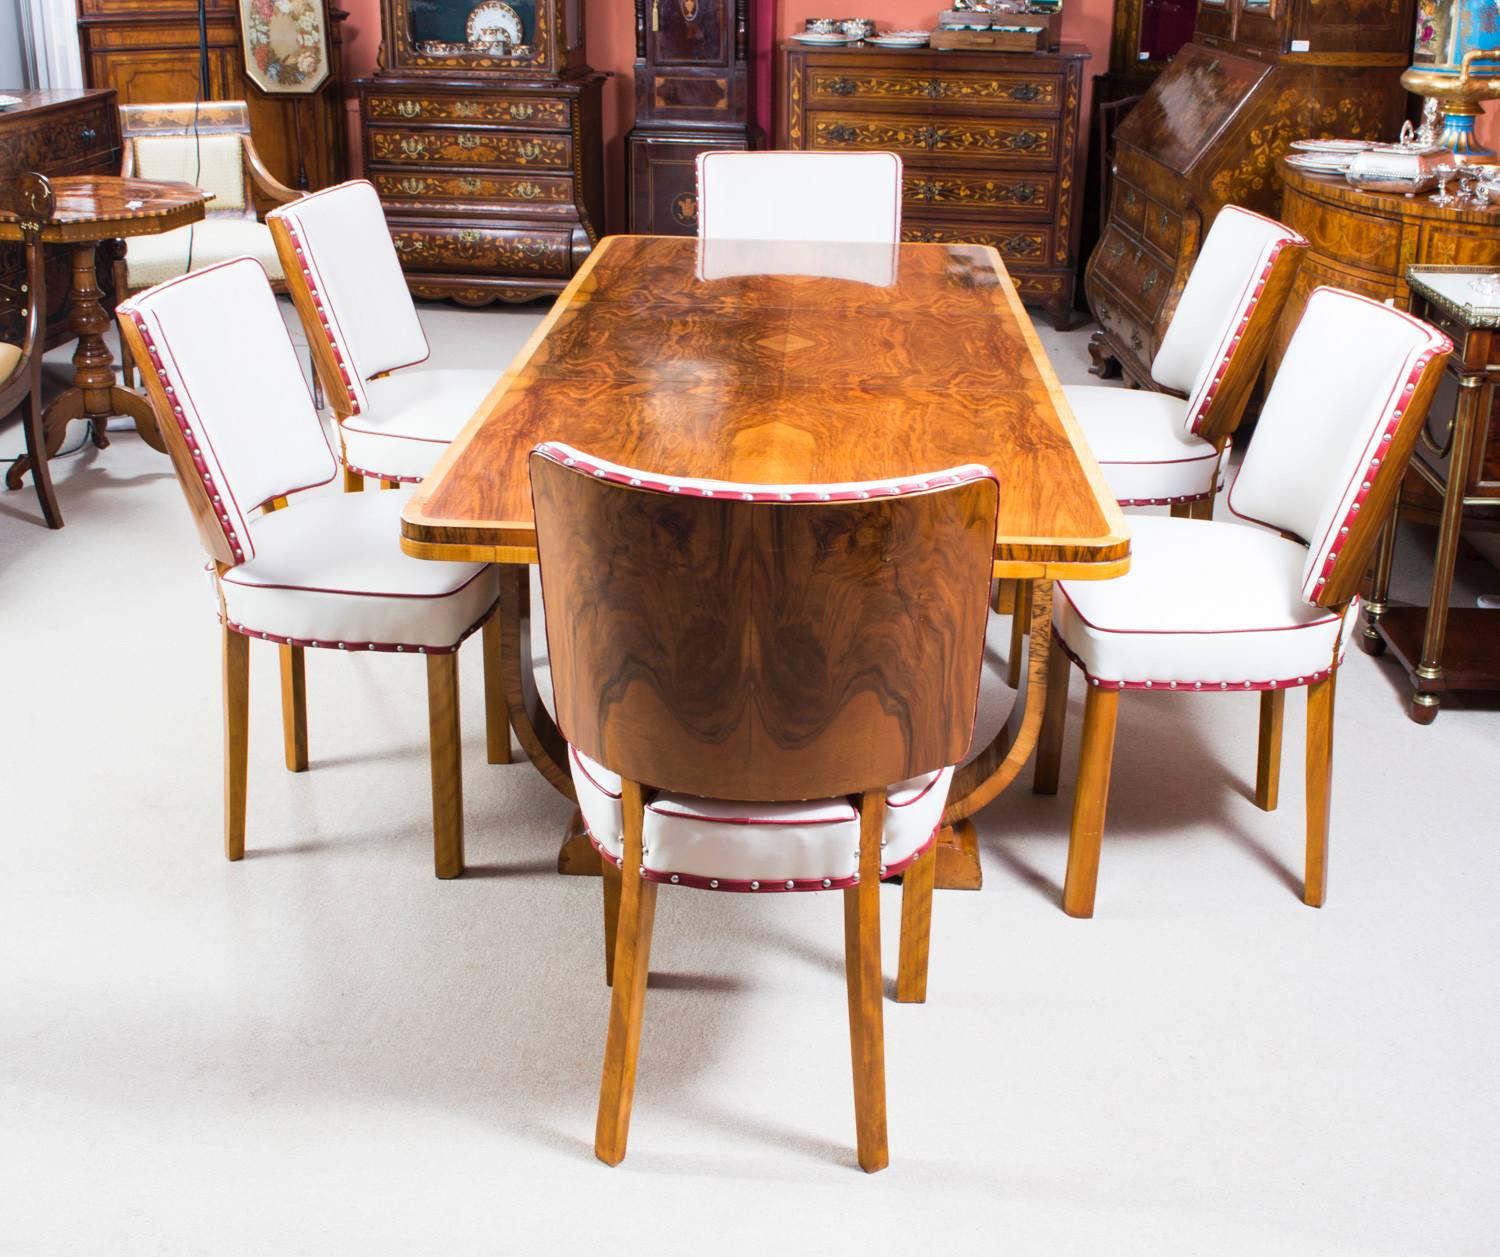 This is a beautiful antique Art Deco burr walnut dining set, comprising a burr walnut extending table and the matching set of six chairs, all circa 1930 in date. 

It features a rectangular top over U-shaped twin pedestal legs on splayed feet. It